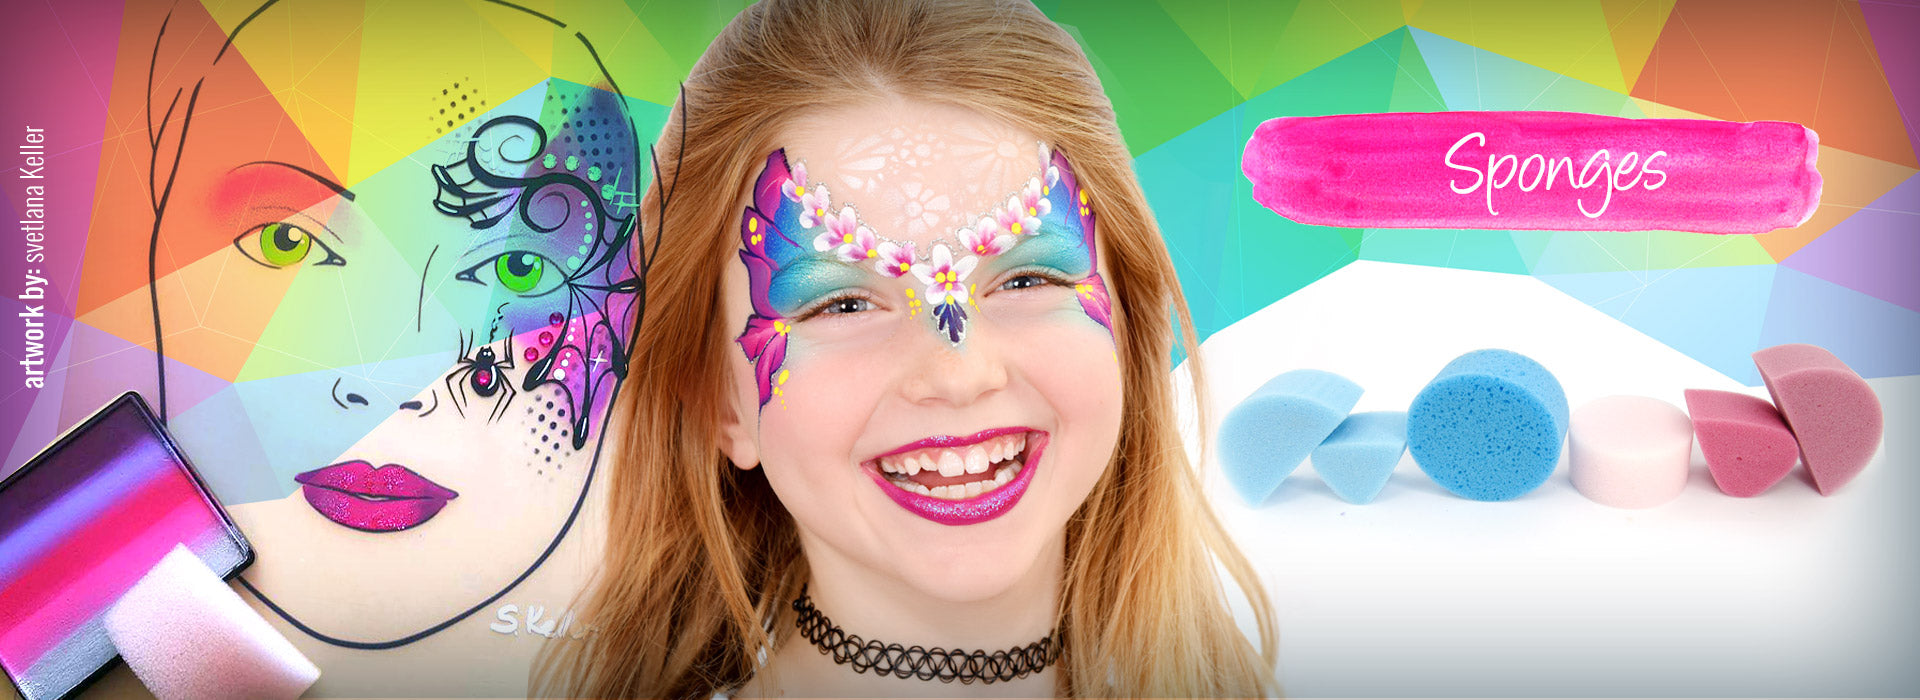 Airbrush Parts & Accessories, Face Painting Supplies, Silly Farm